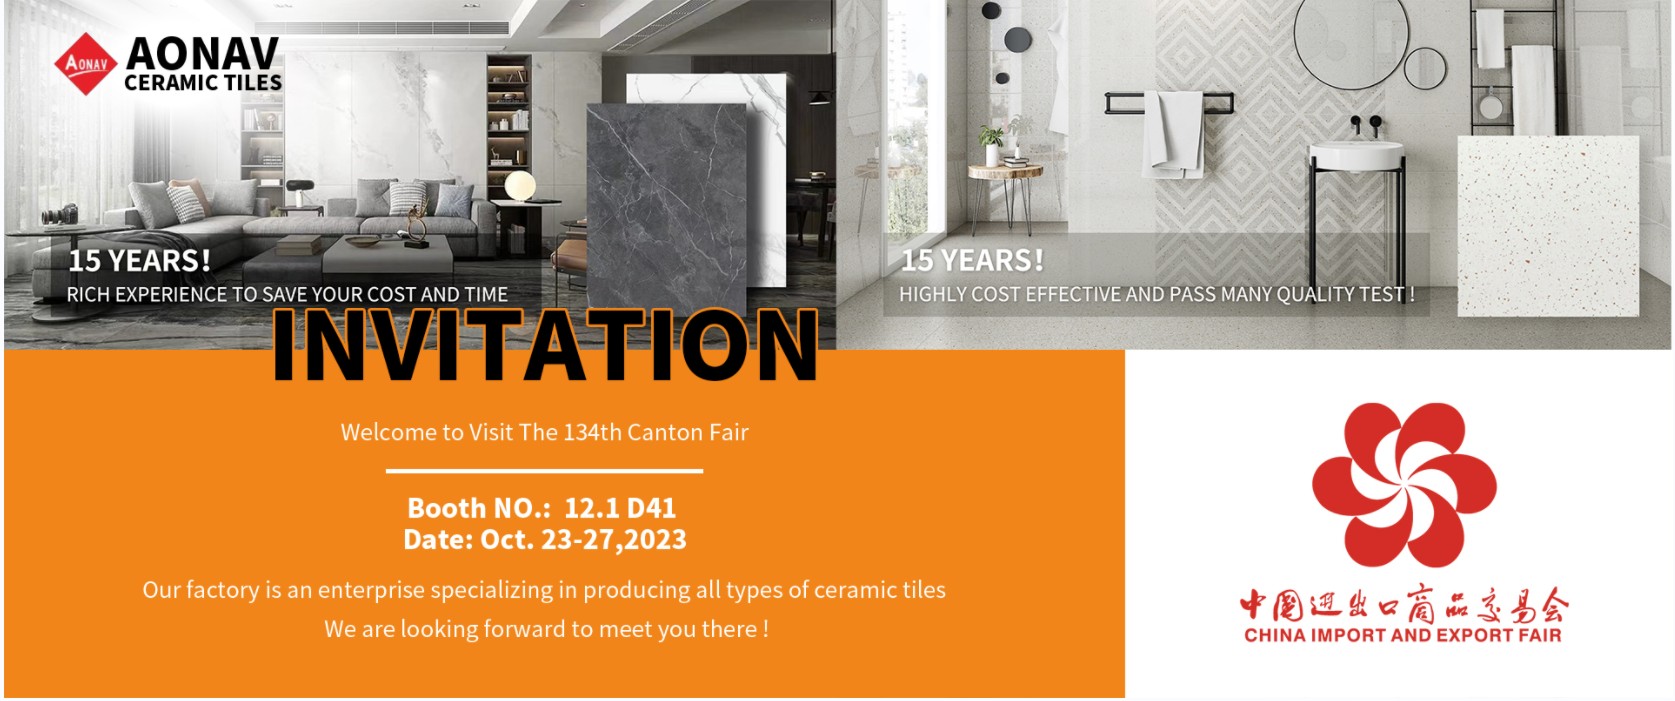 Welcome to Visit The 134th Canton Fair